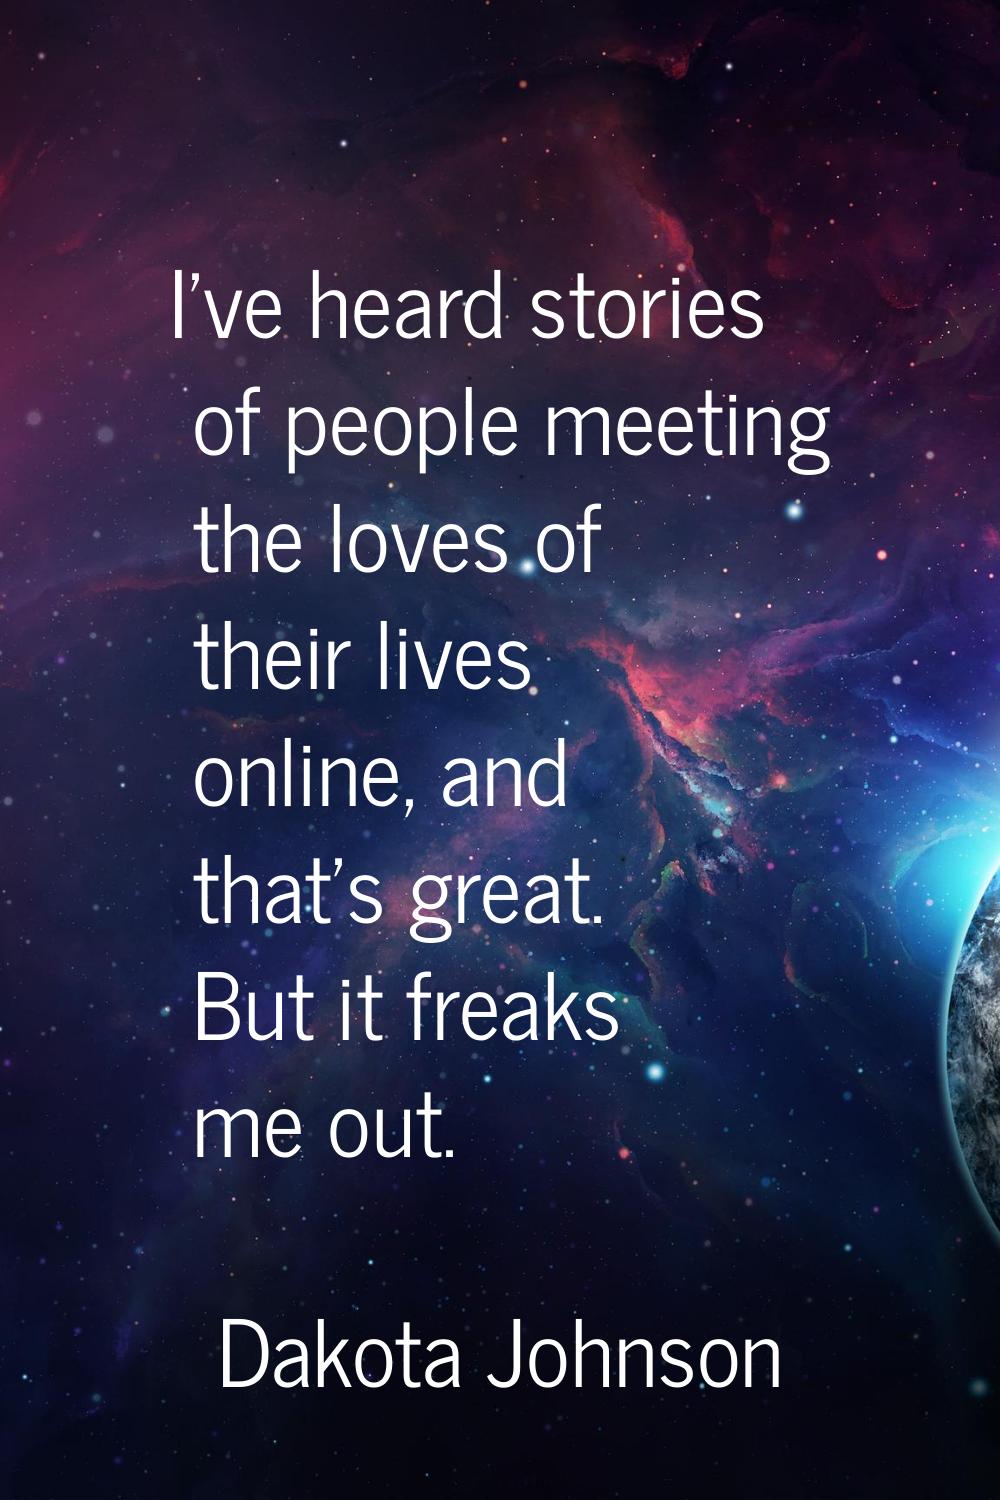 I've heard stories of people meeting the loves of their lives online, and that's great. But it frea